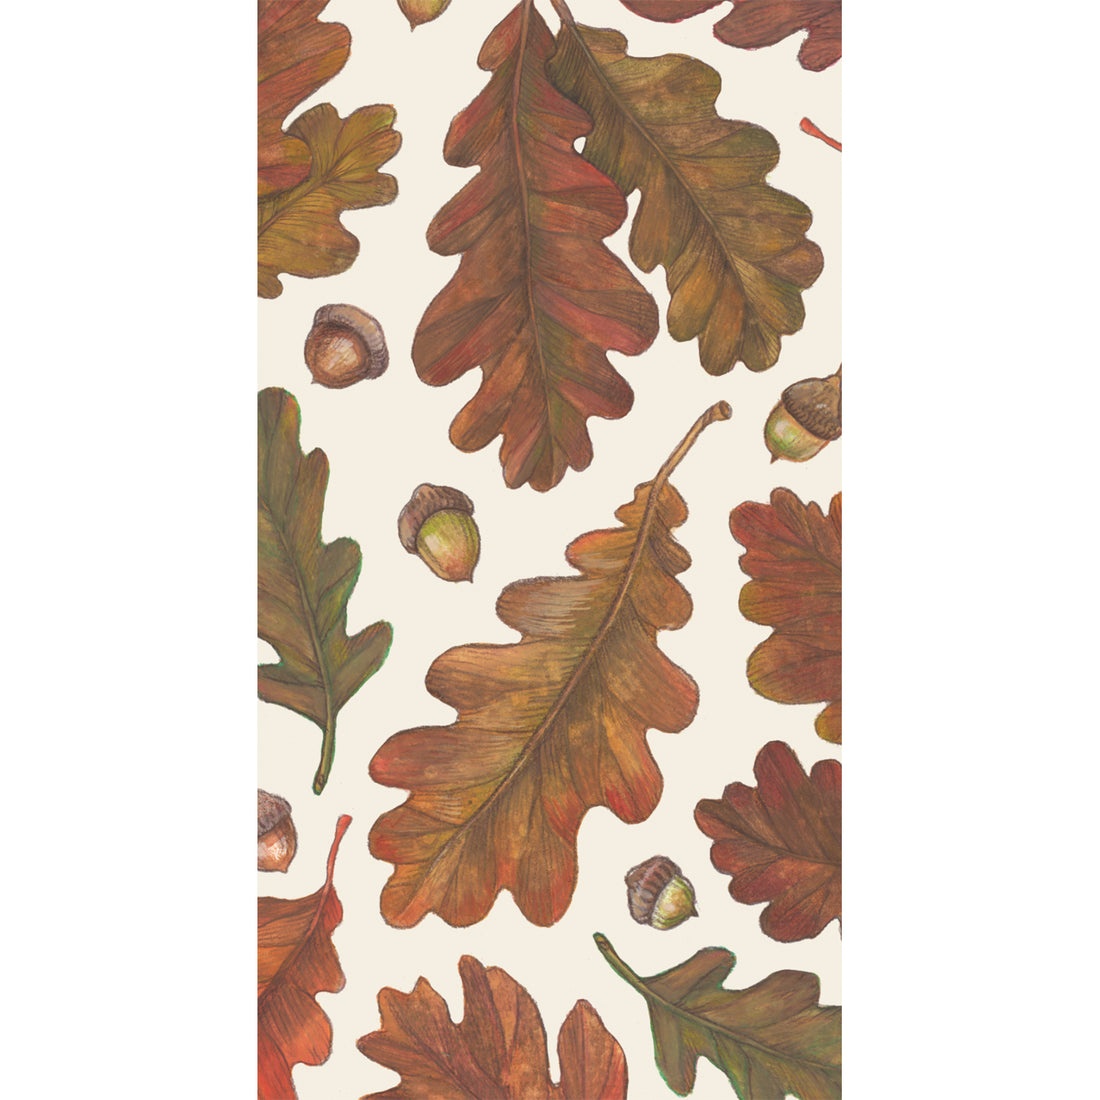 An edge-to-edge design of orange and brown oak leaves scattered with acorns on a white background, on a rectangle guest napkin.